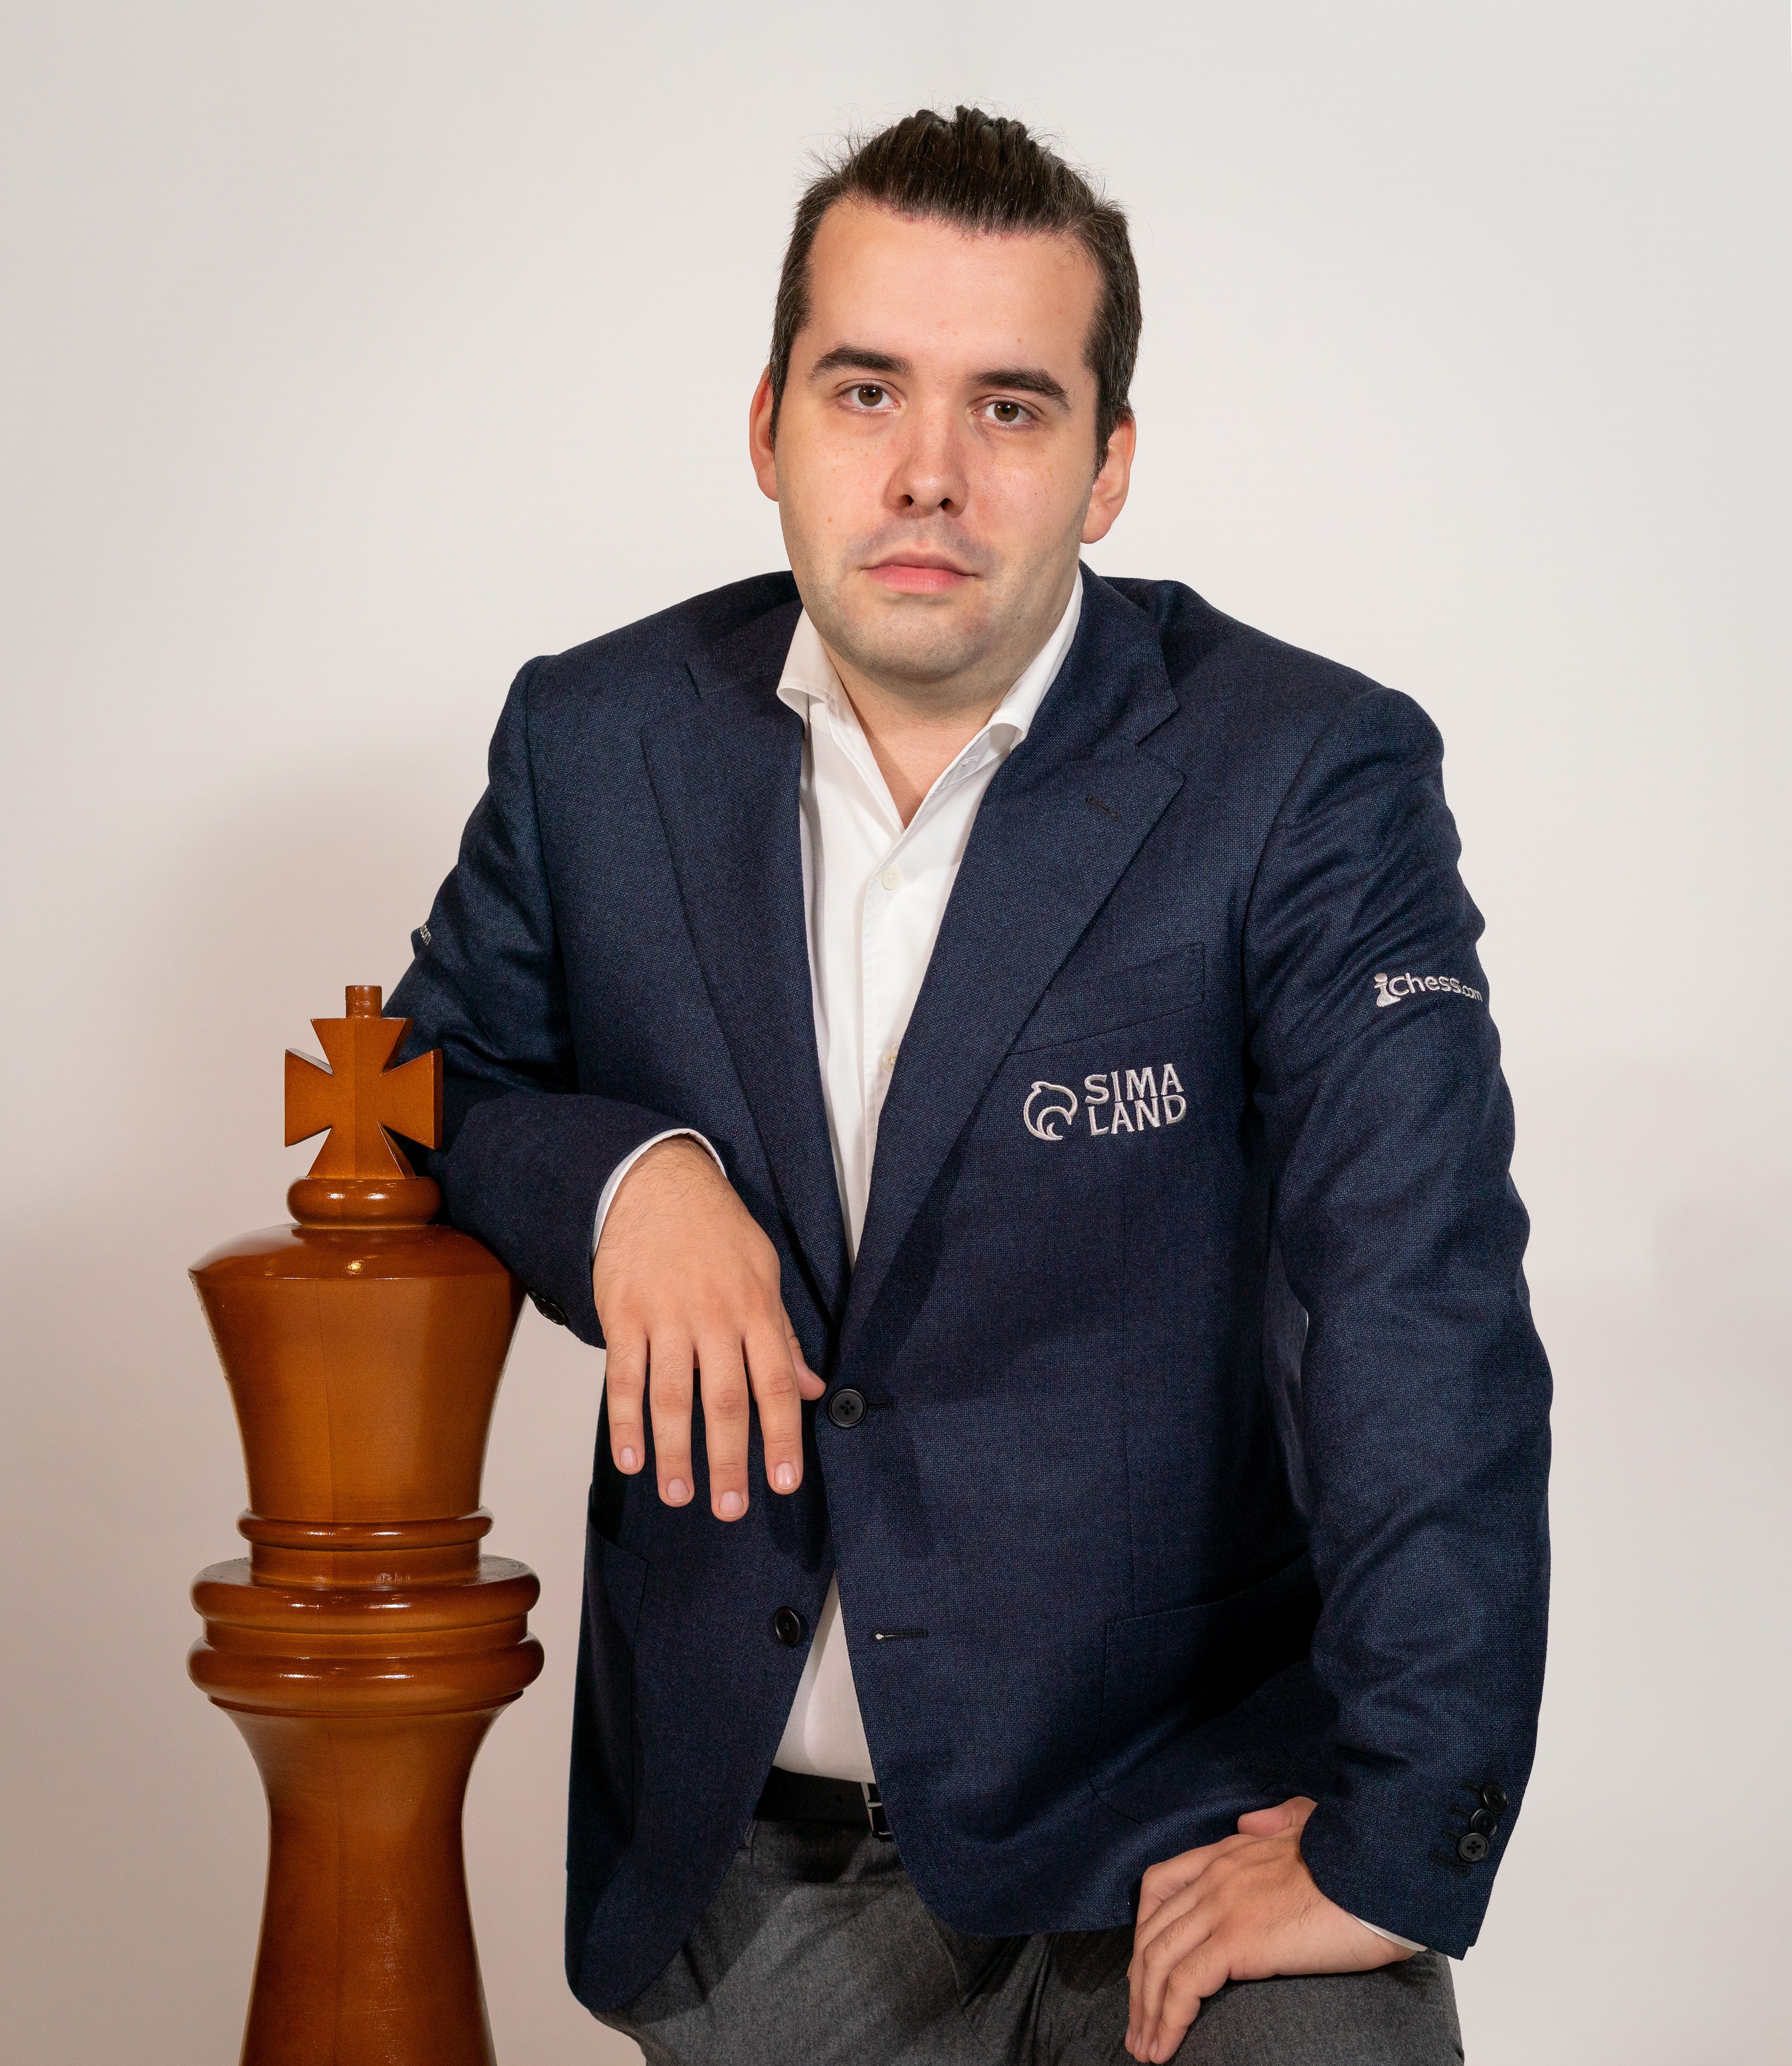 Chess.com - ♖ The 2020 Candidates Tournament starts tomorrow on  chess.com/tv! Watch the top chess players begin their quest to become the  challenger for the 2020 World Championship against Magnus Carlsen! ♔